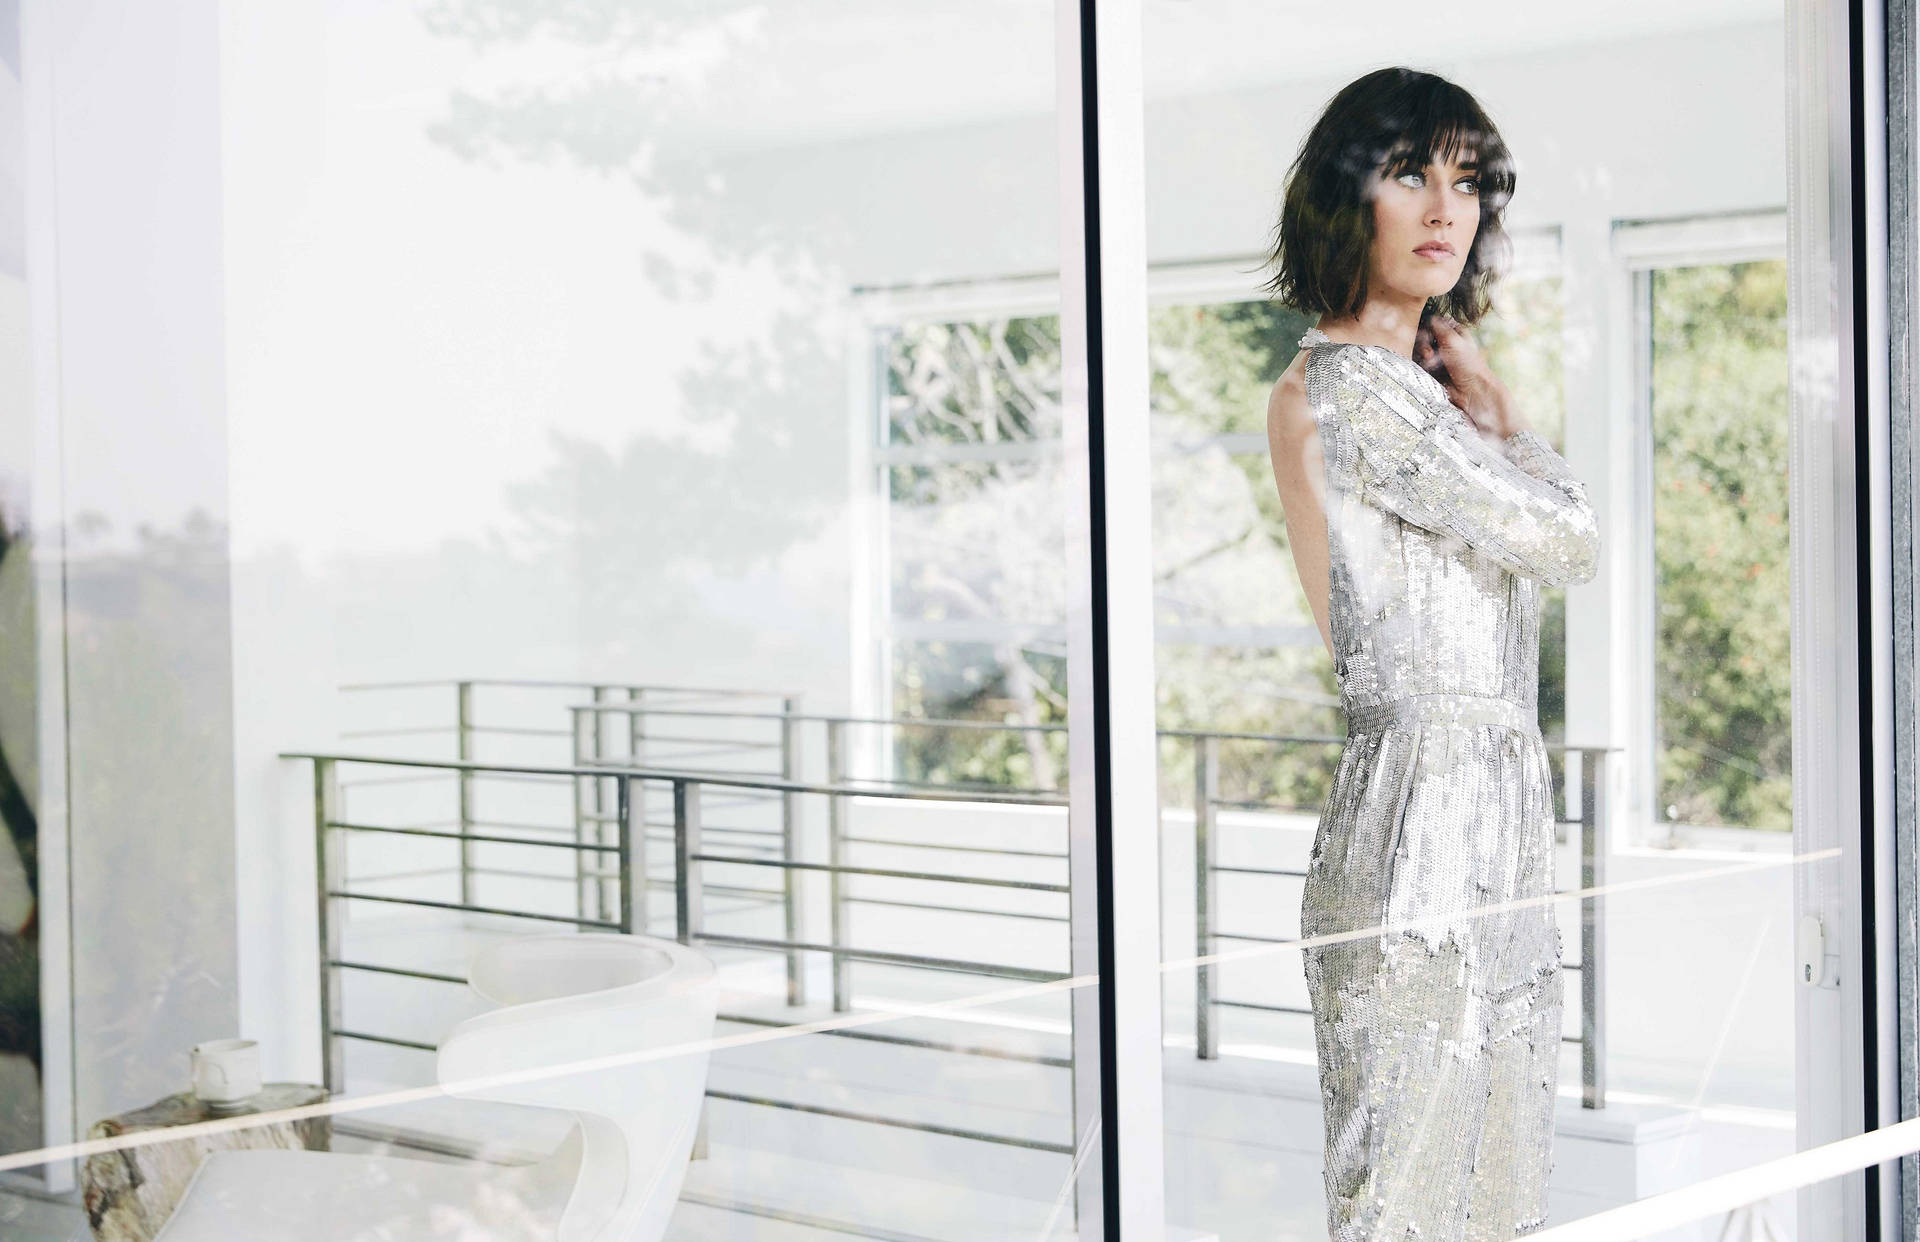 Lizzy Caplan By The Window Wallpaper